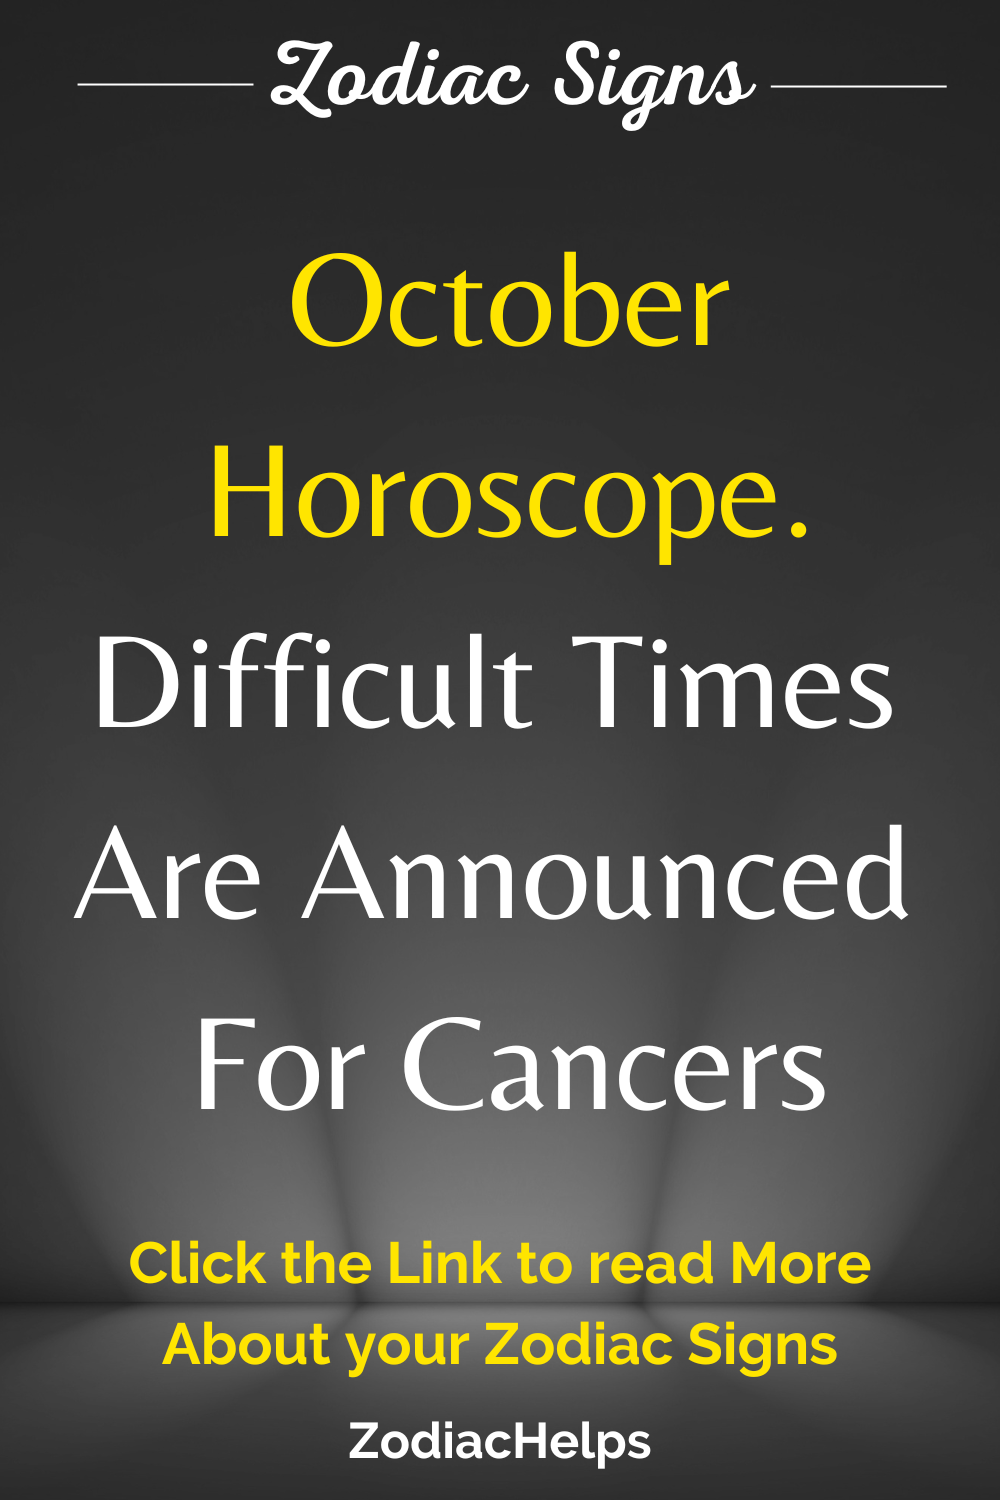 October Horoscope. Difficult Times Are Announced For Cancers